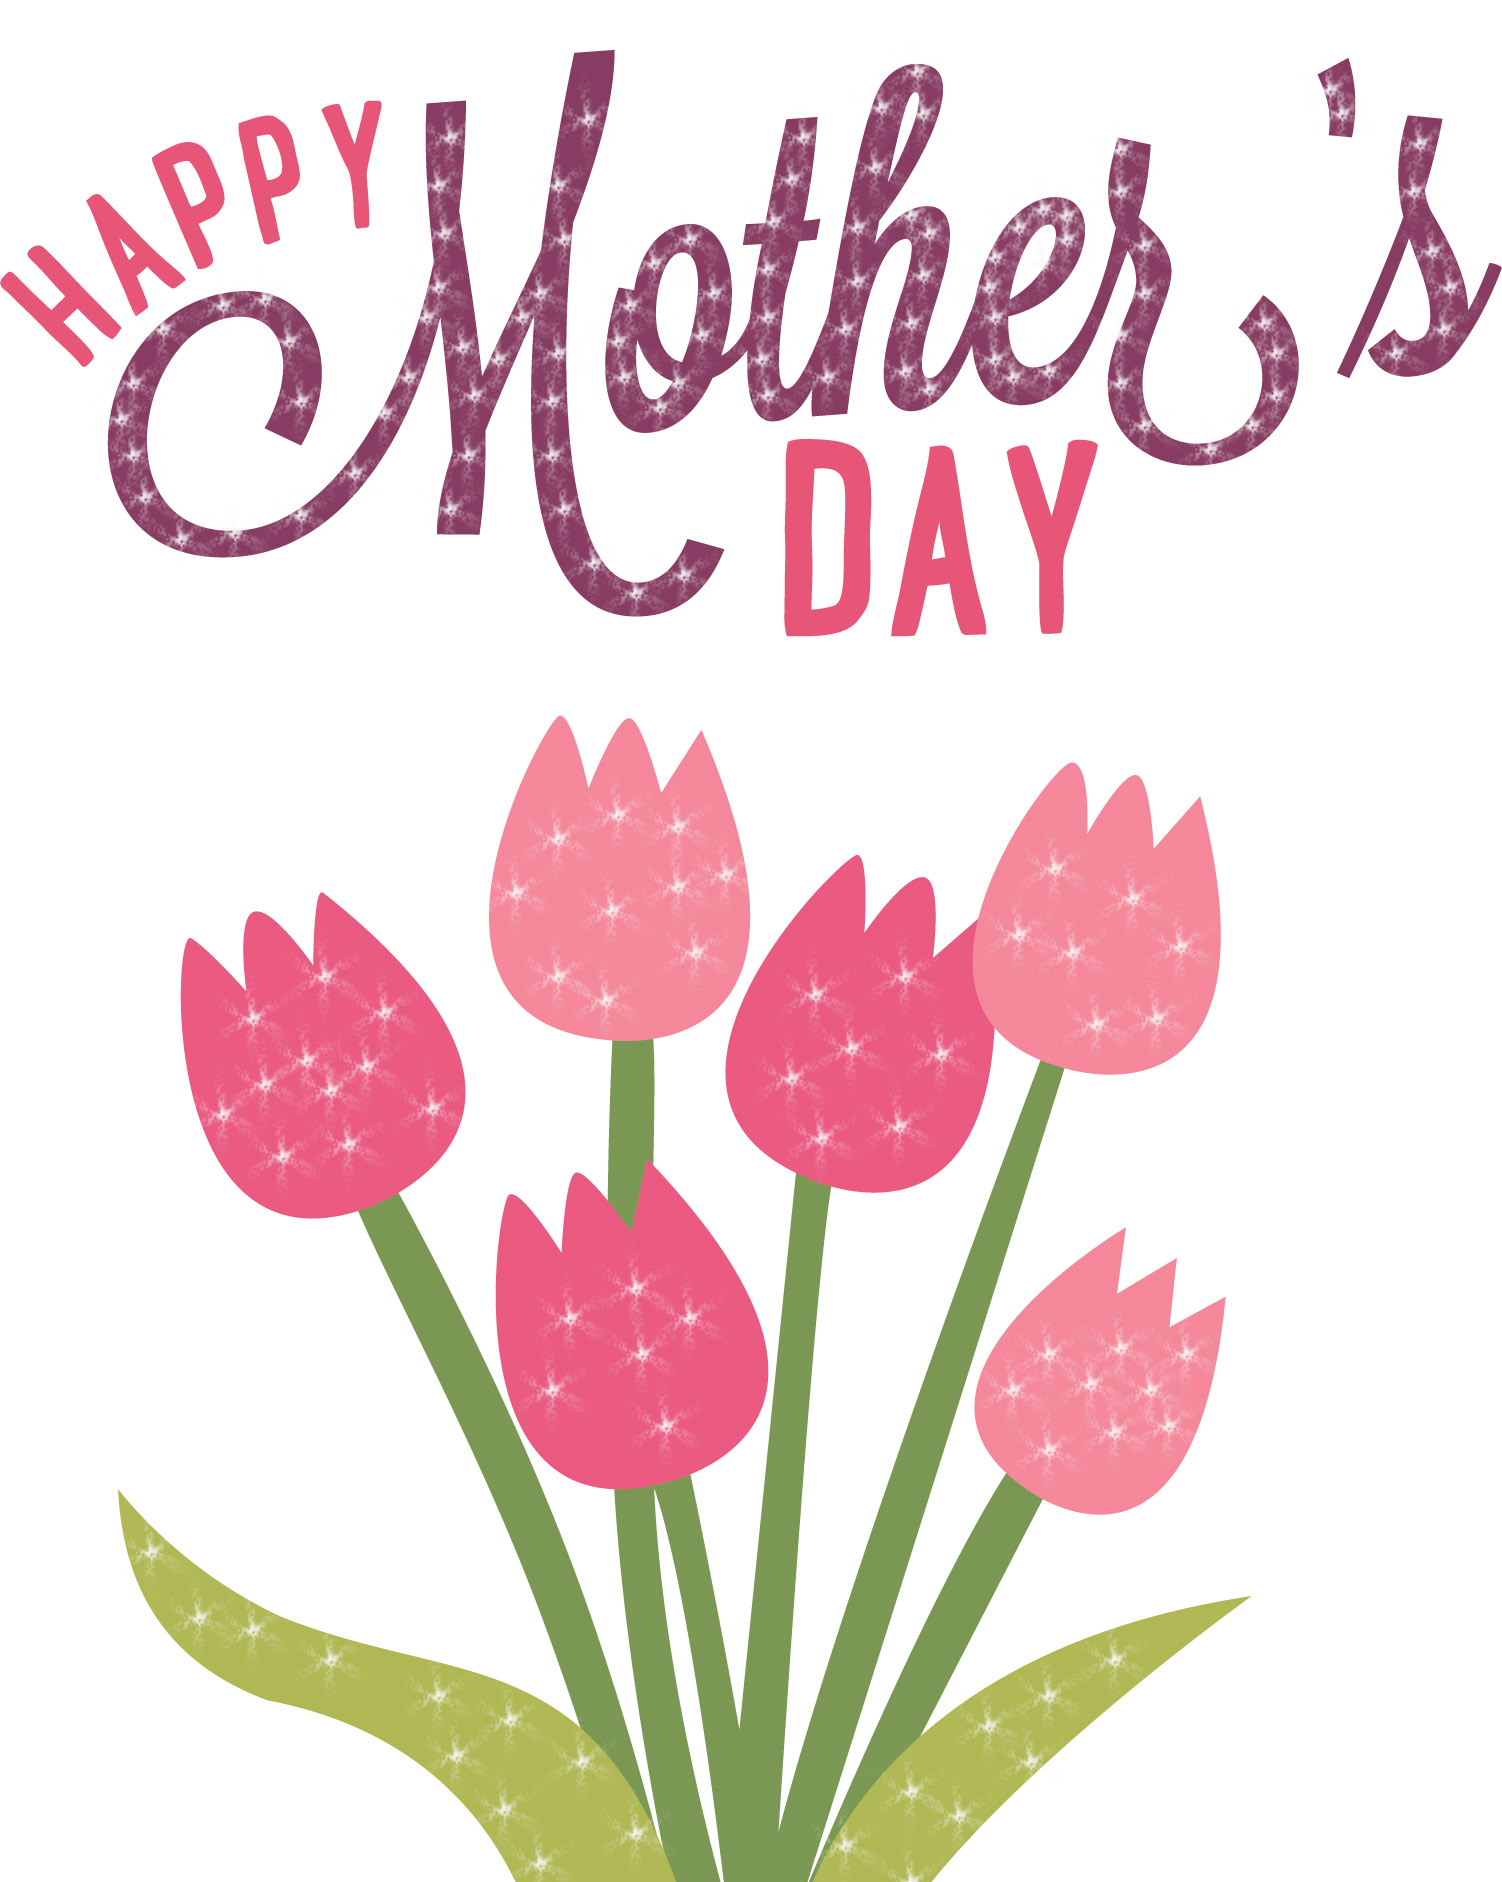 Happy Mothers Day 2018 HD Images